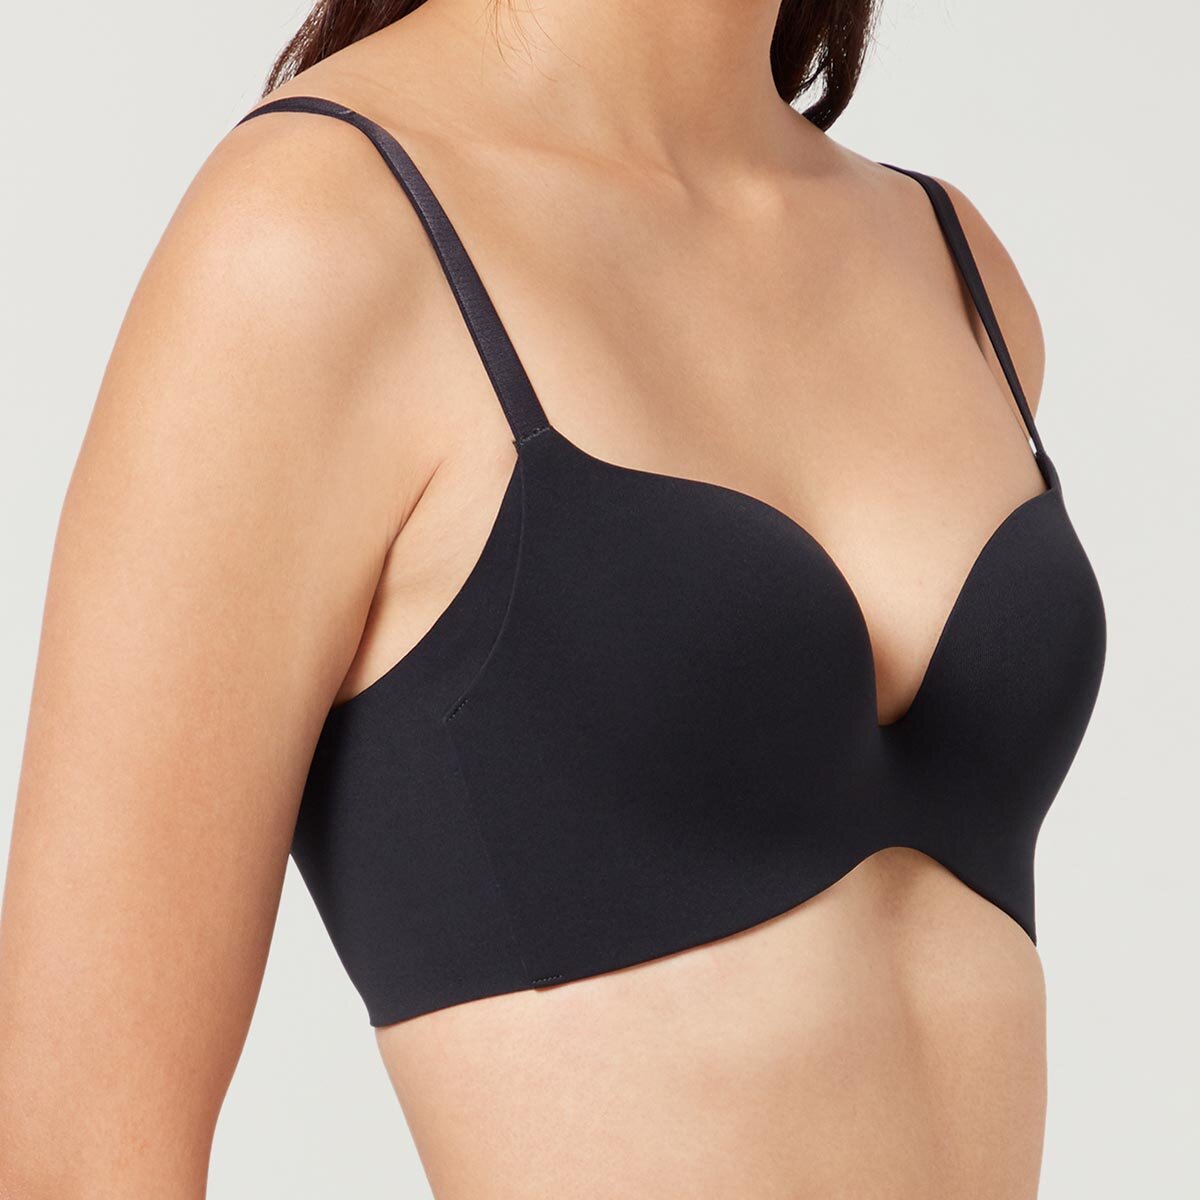 Solution Soft Wire REadGrid™ Wing Butterfly Push Up Bra – Her own words